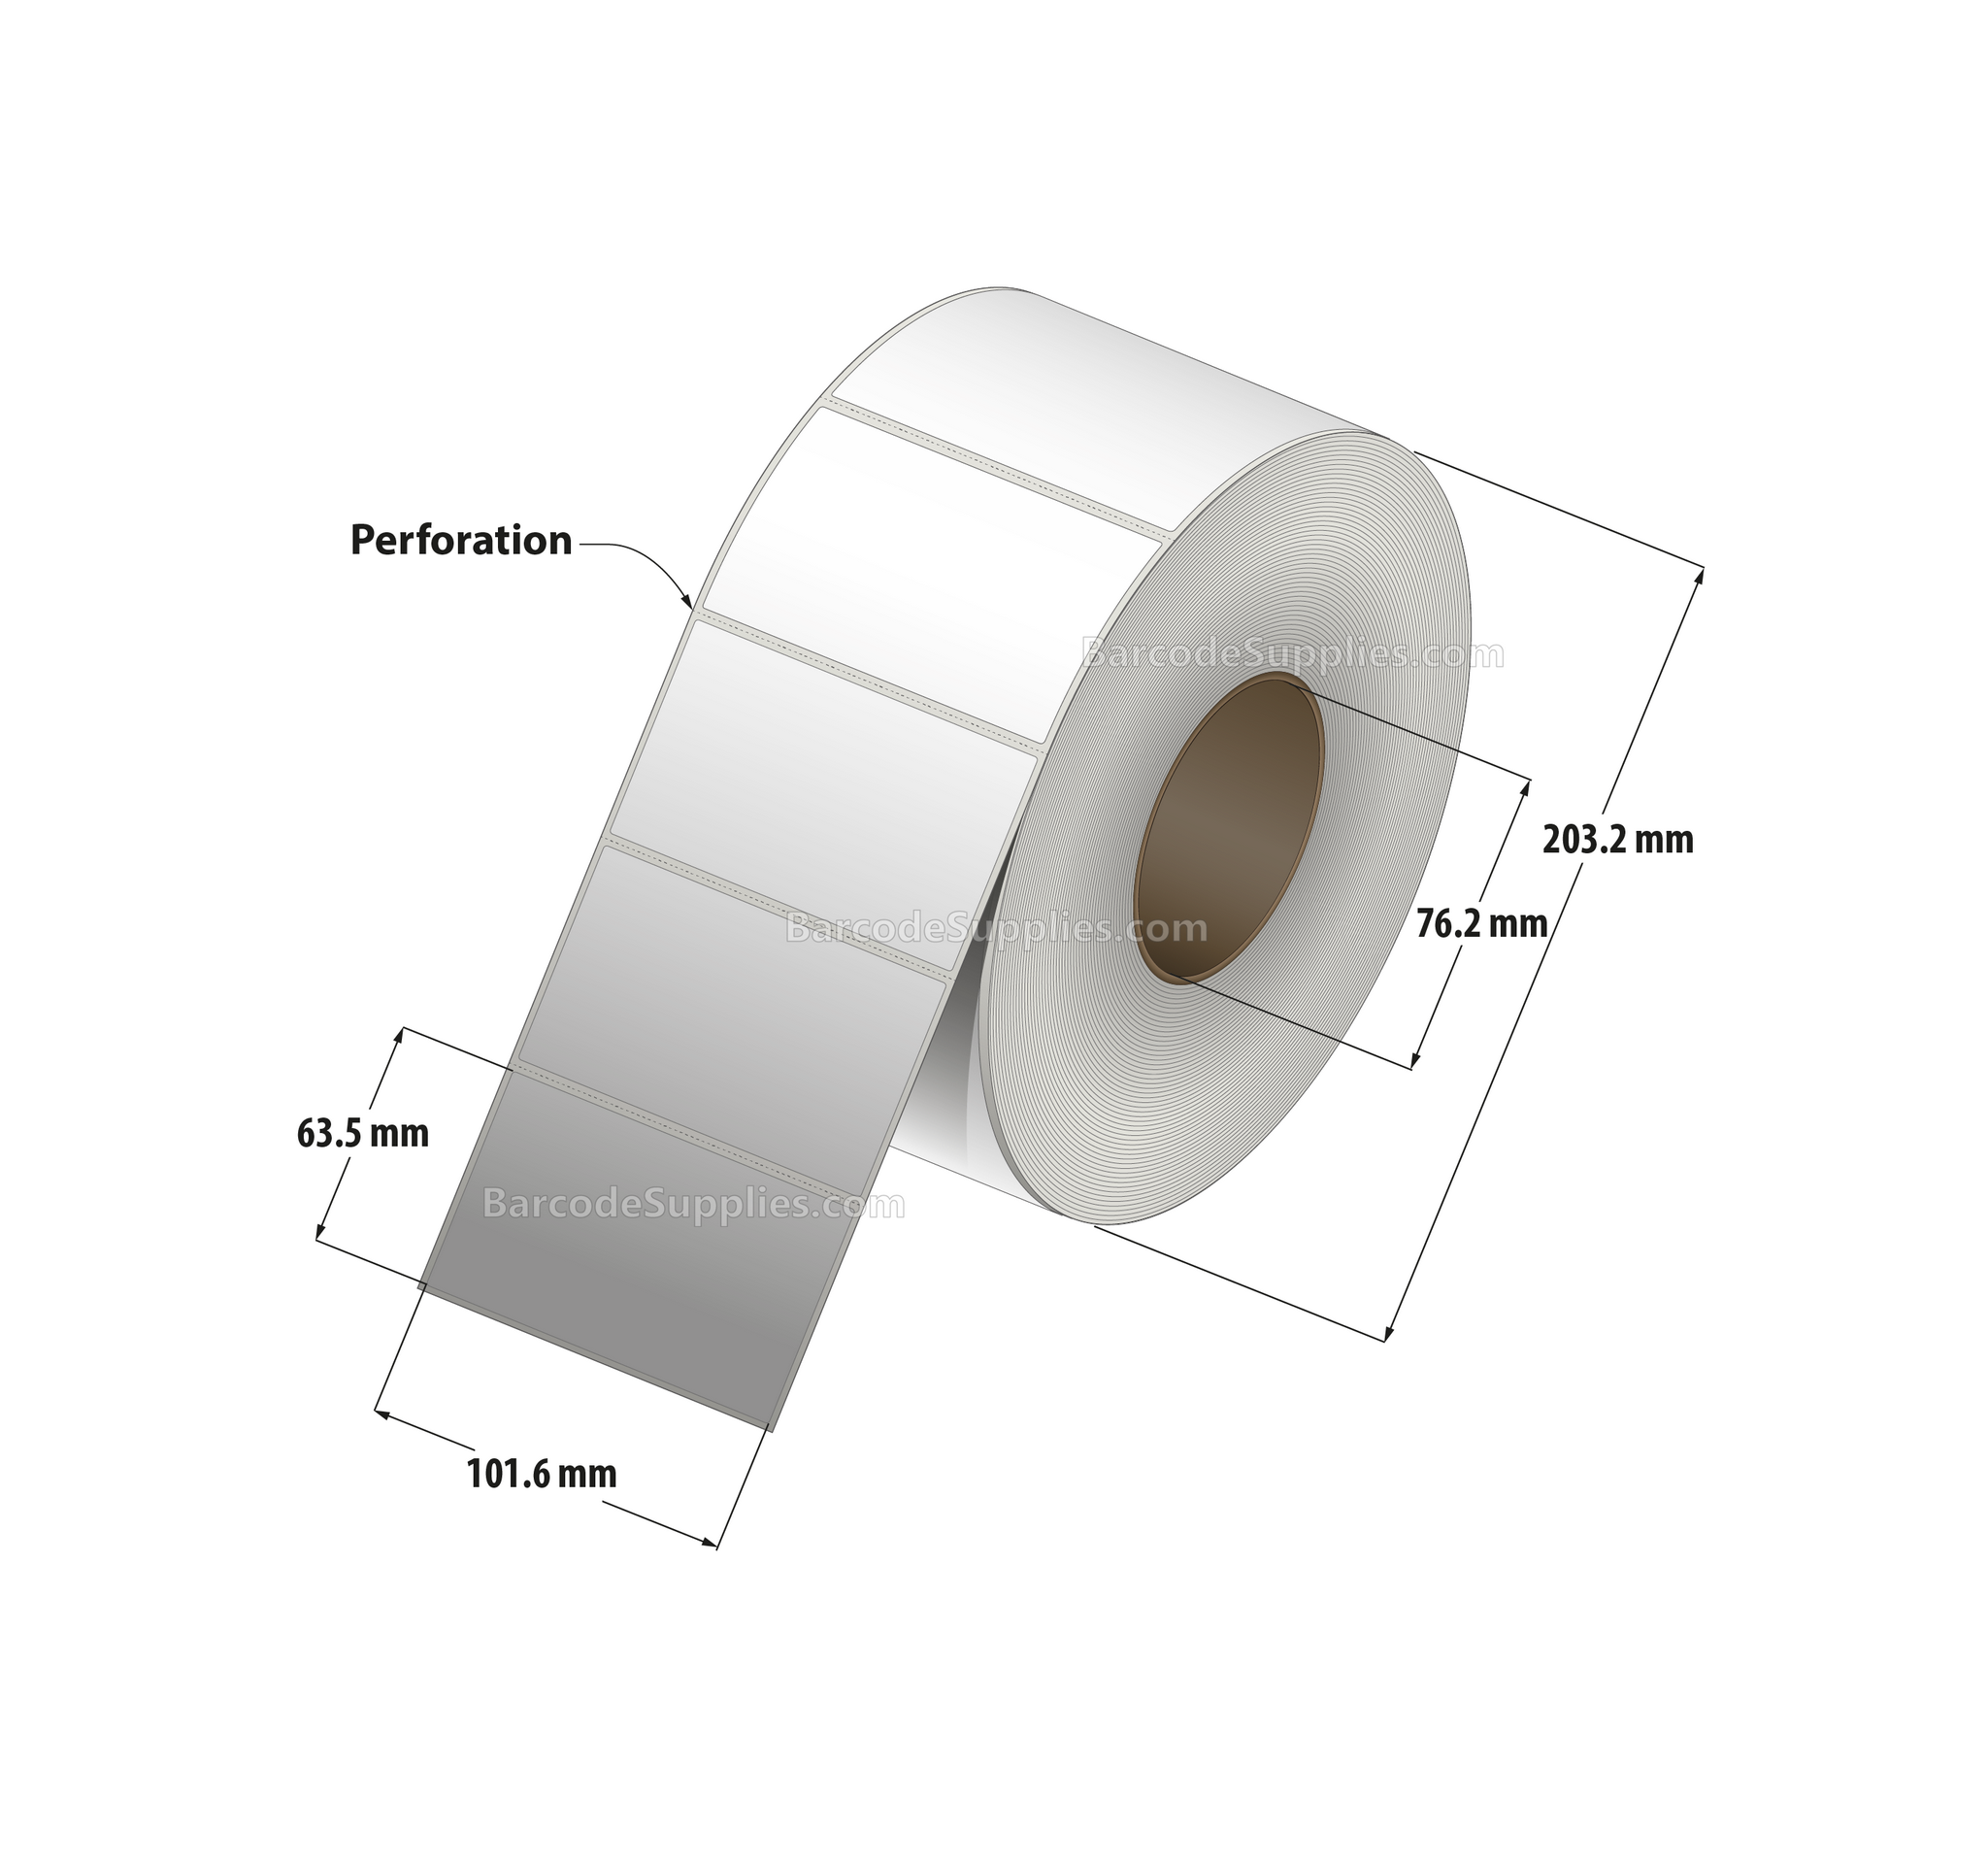 4 x 2.5 Thermal Transfer White Labels With Permanent Adhesive - Perforated - 2500 Labels Per Roll - Carton Of 4 Rolls - 10000 Labels Total - MPN: RT-4-25-2500-3